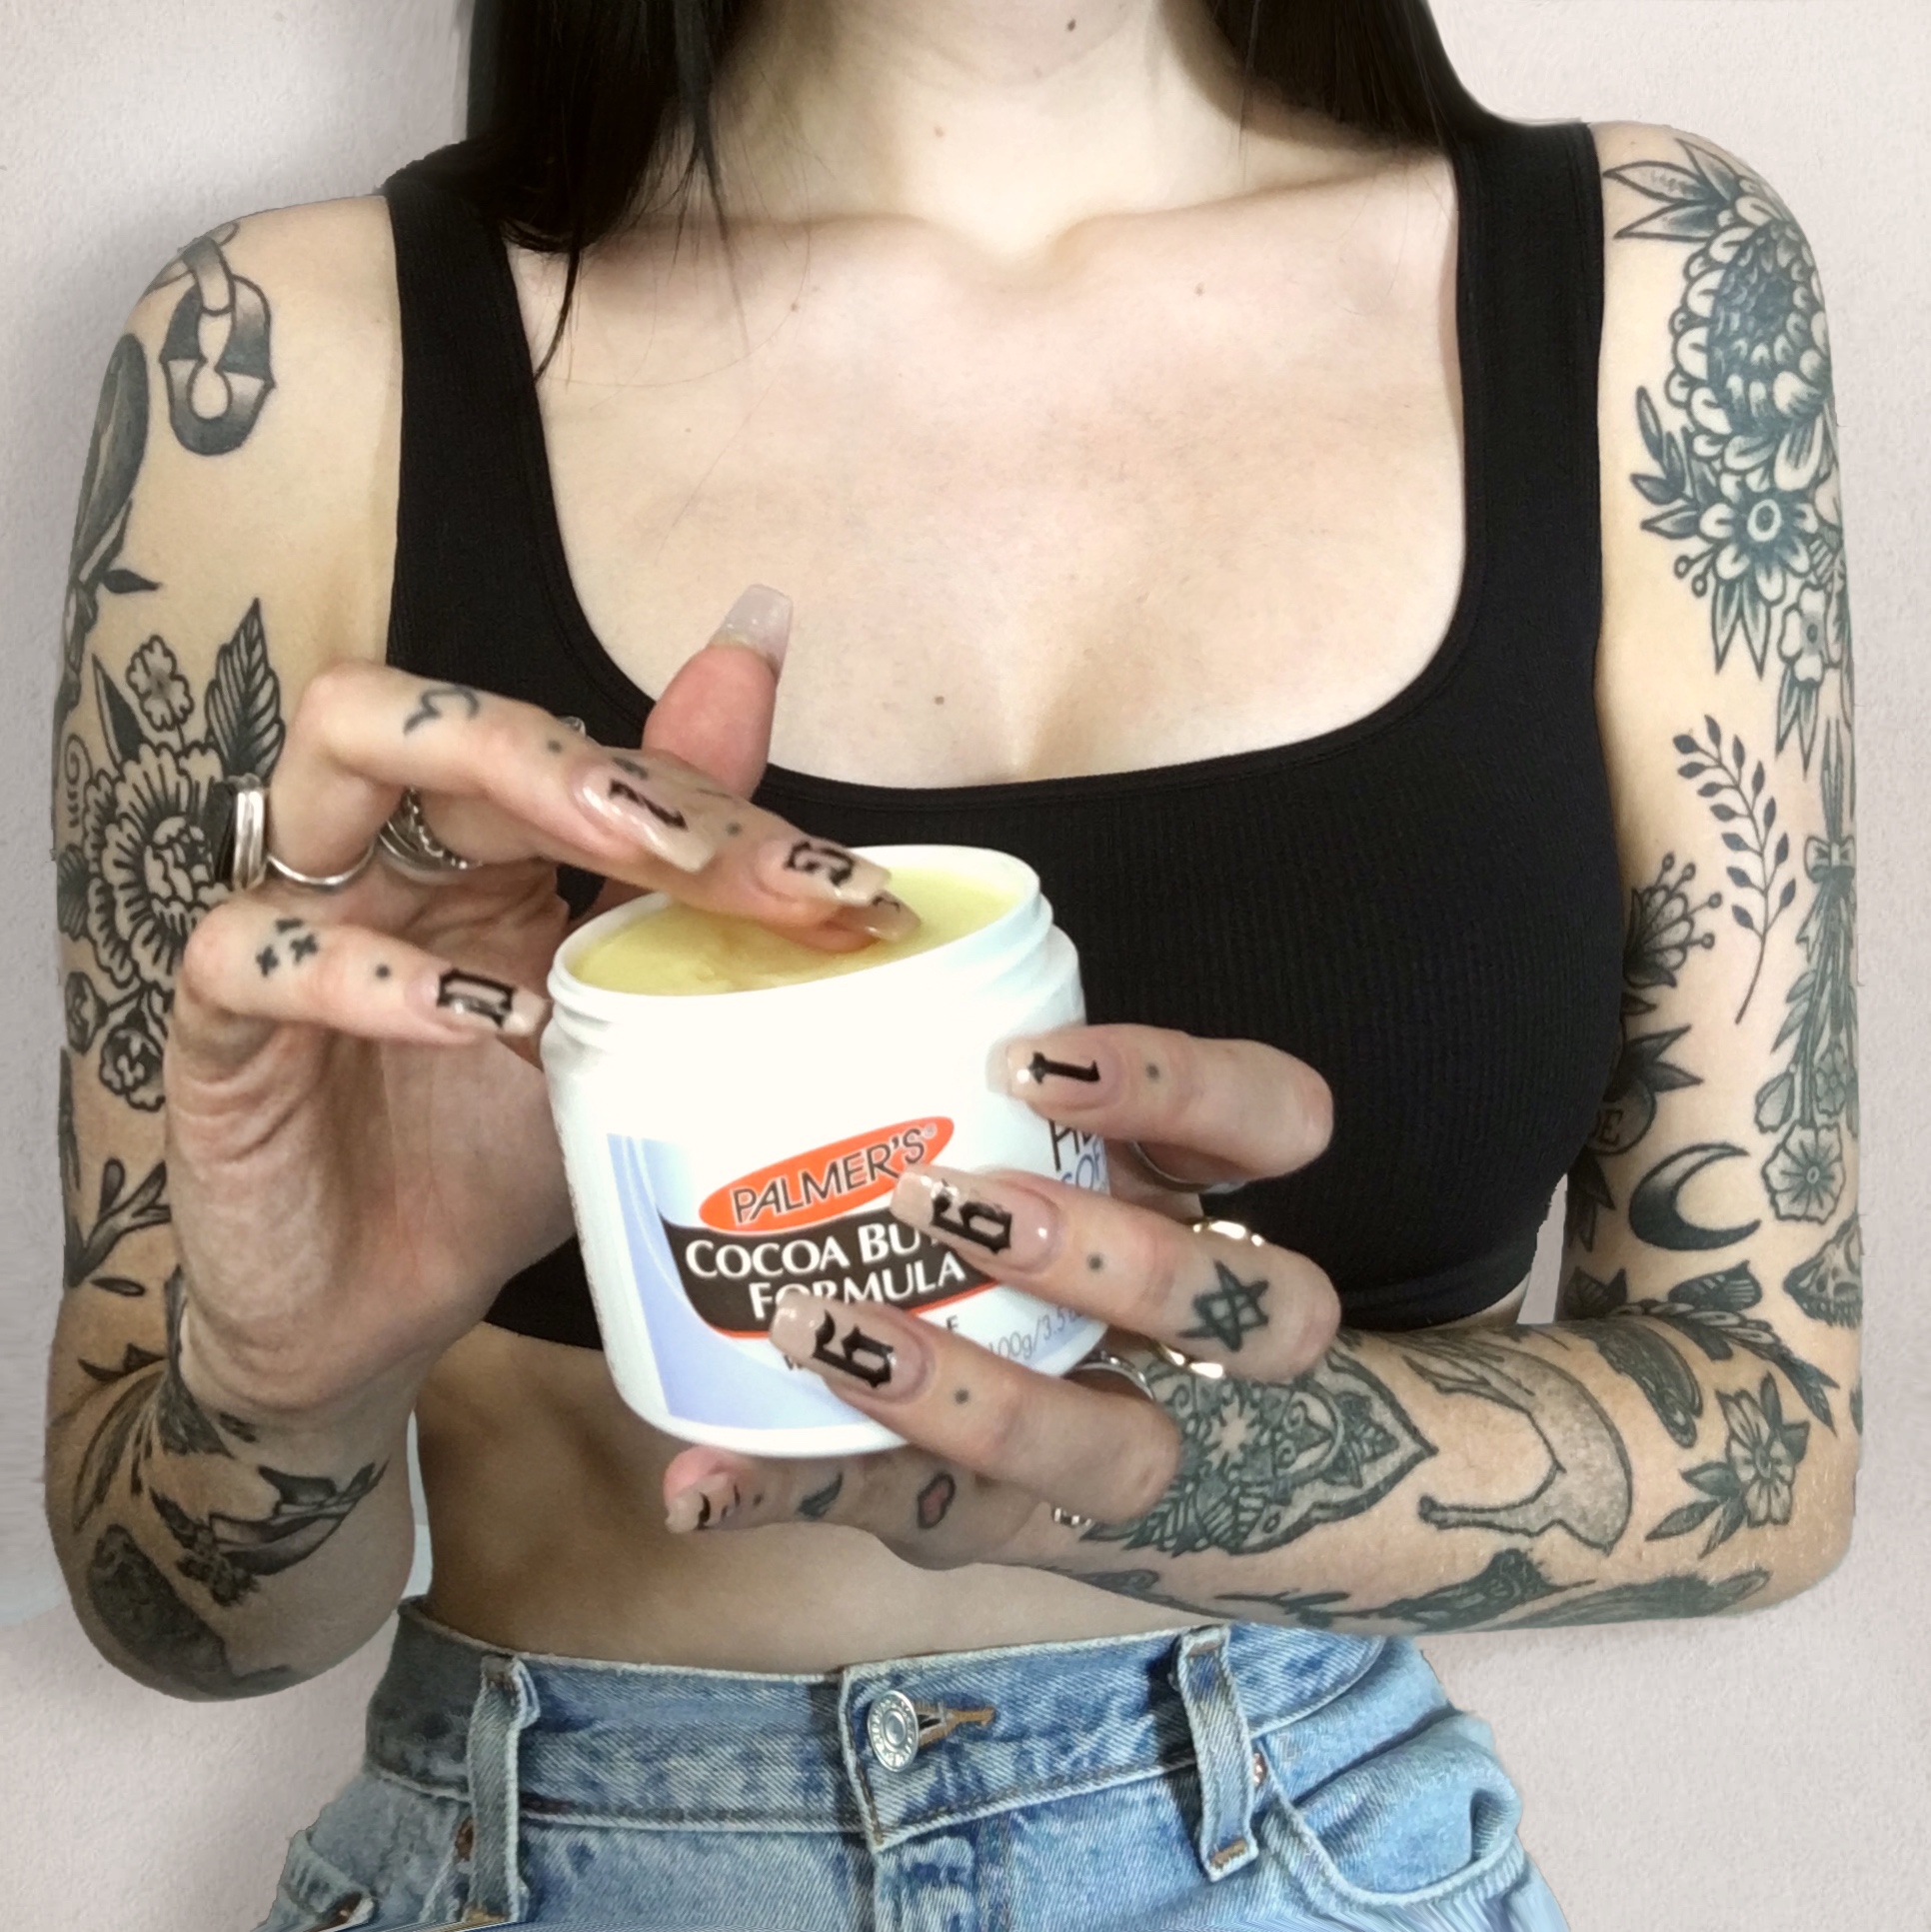 Is Cocoa Butter Good for Tattoos?